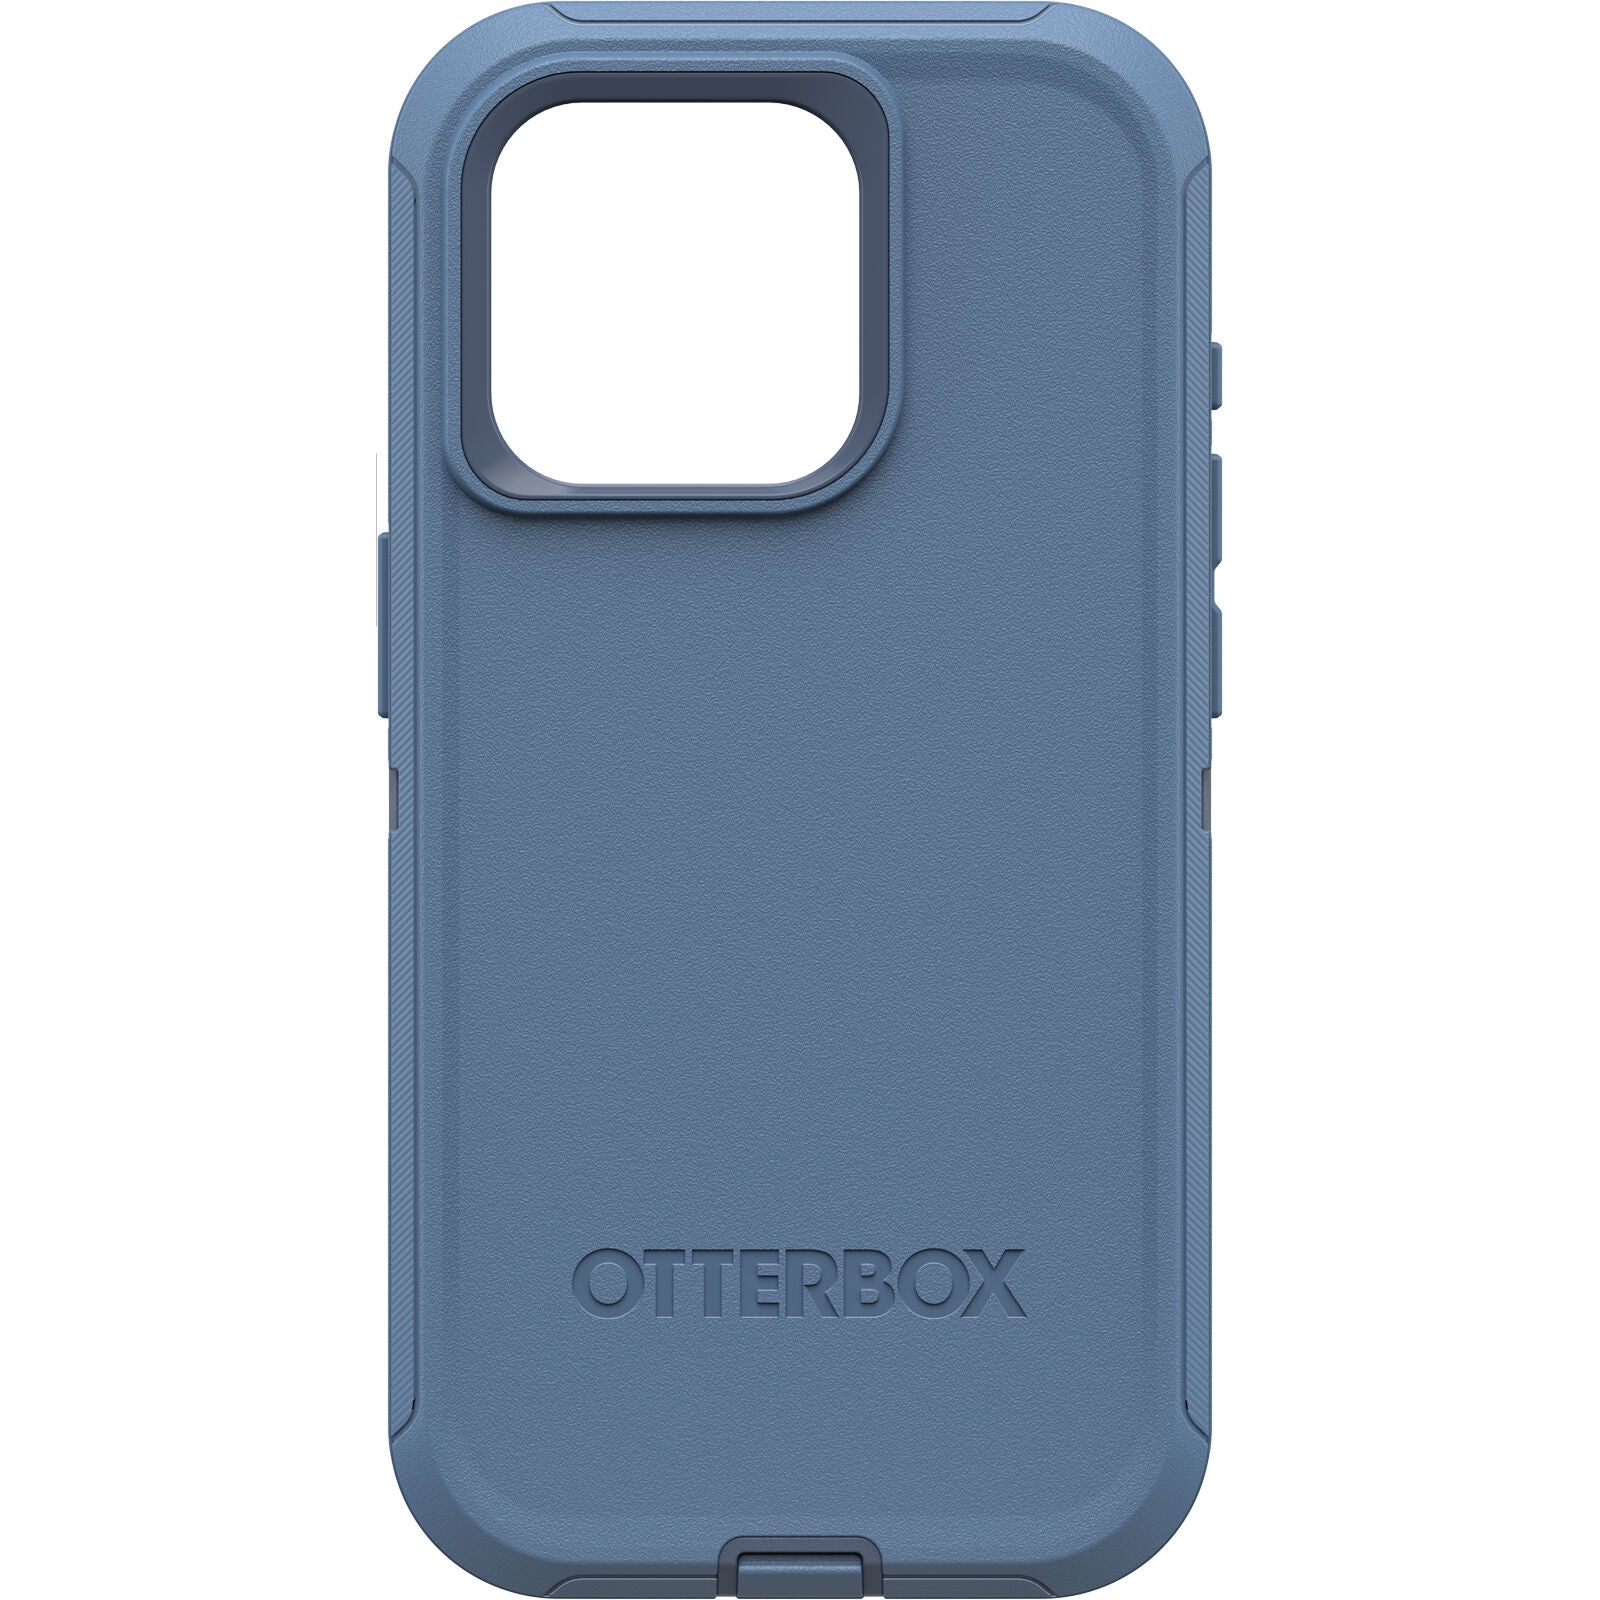 OtterBox Defender Series for iPhone Baby Blue Jeans (Blue)